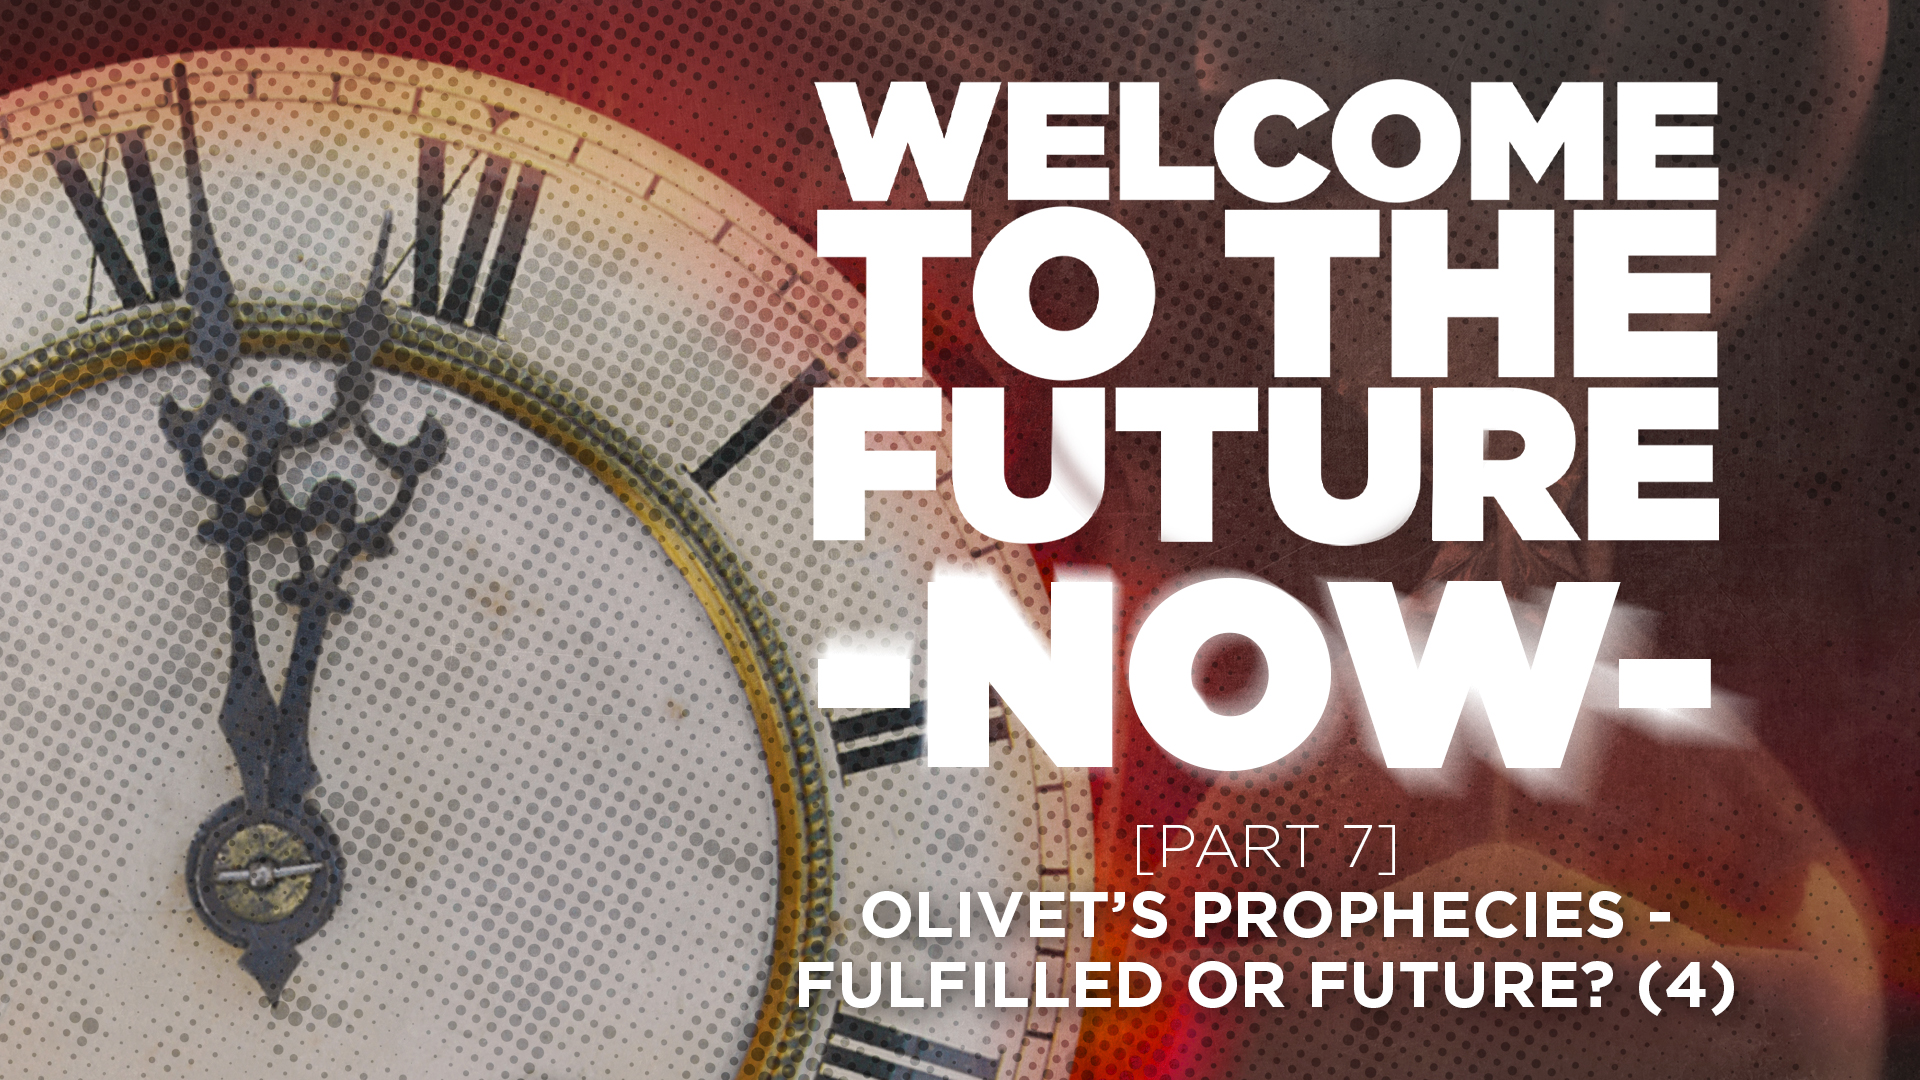 Part 7: Olivet’s Discourse - Fulfilled Or Future? (4)